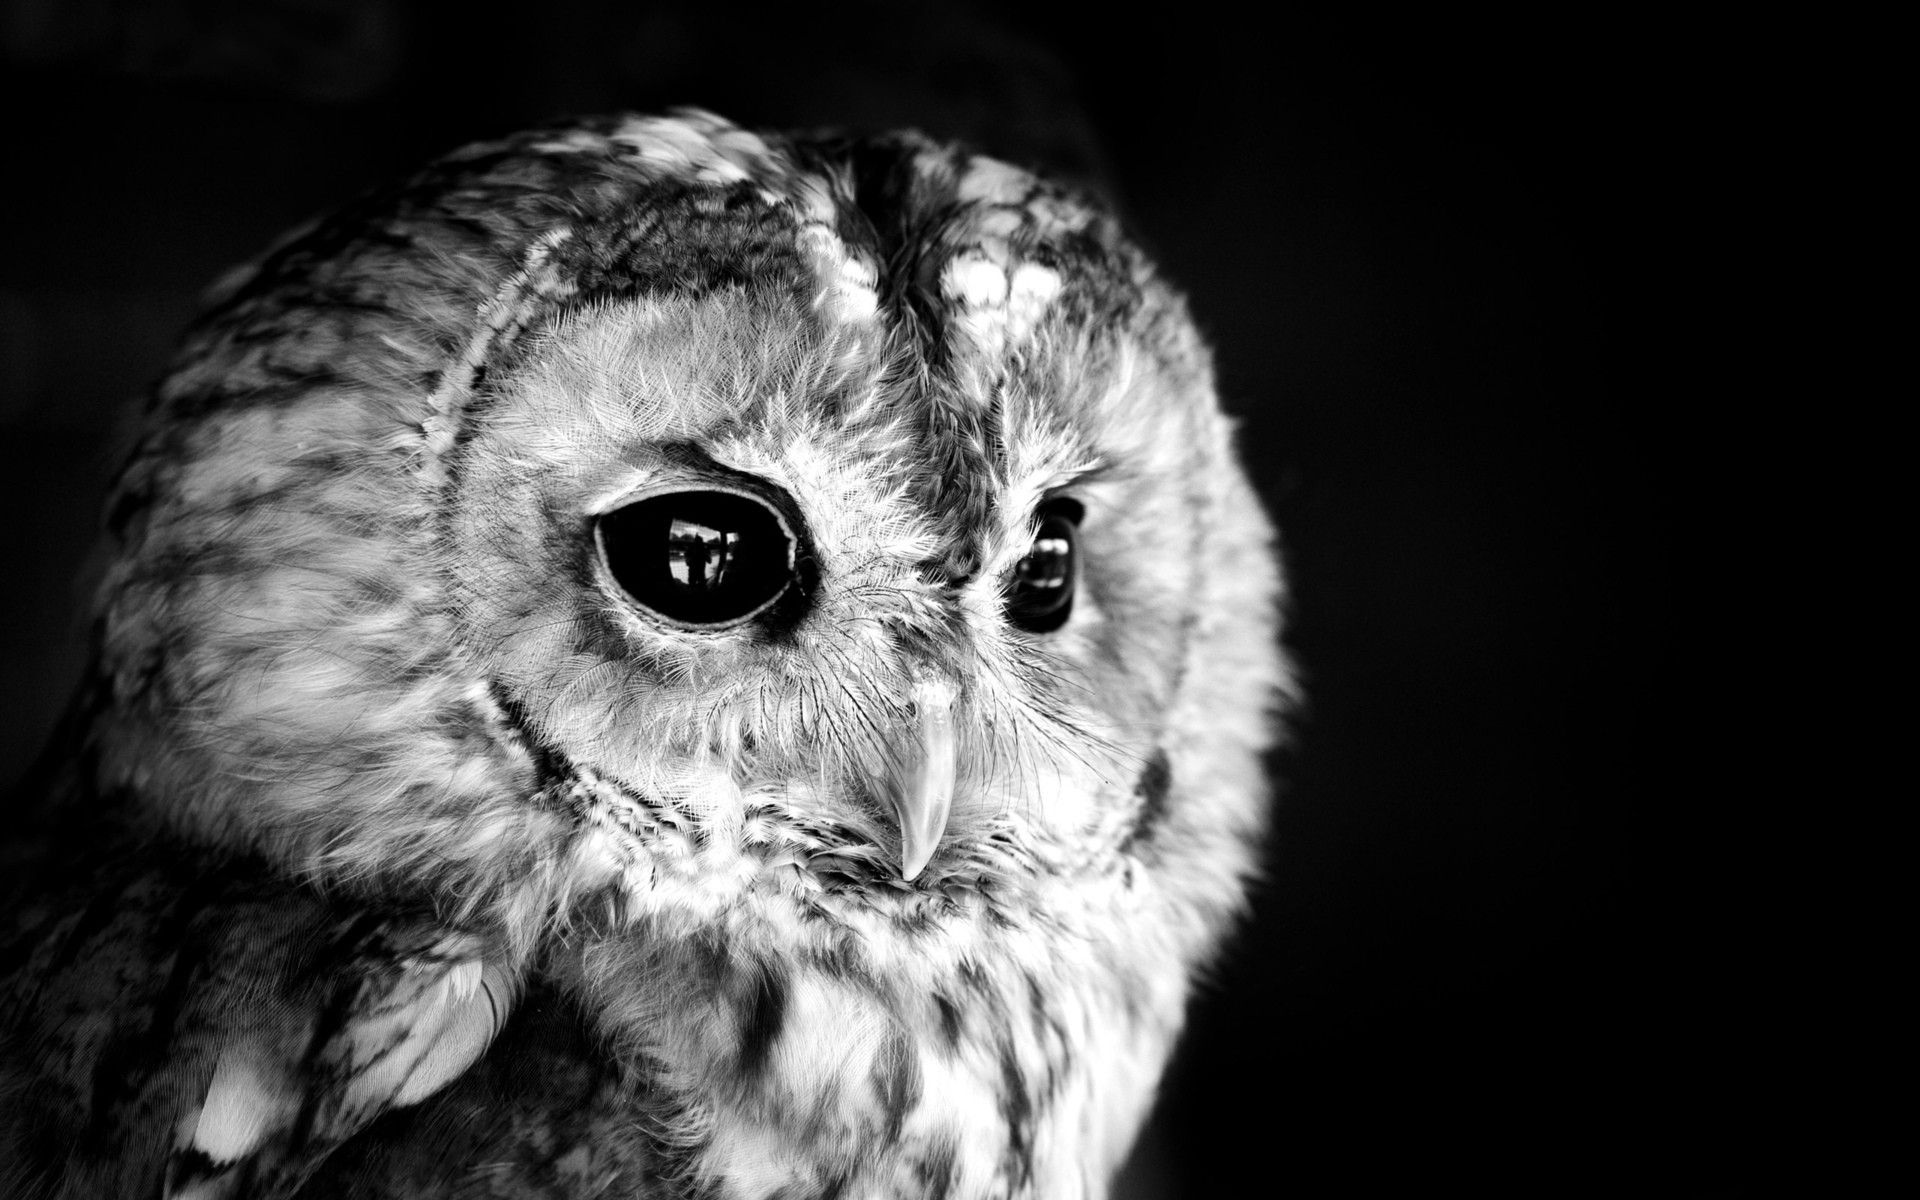 Black and White Owl Wallpapers - Top Free Black and White Owl